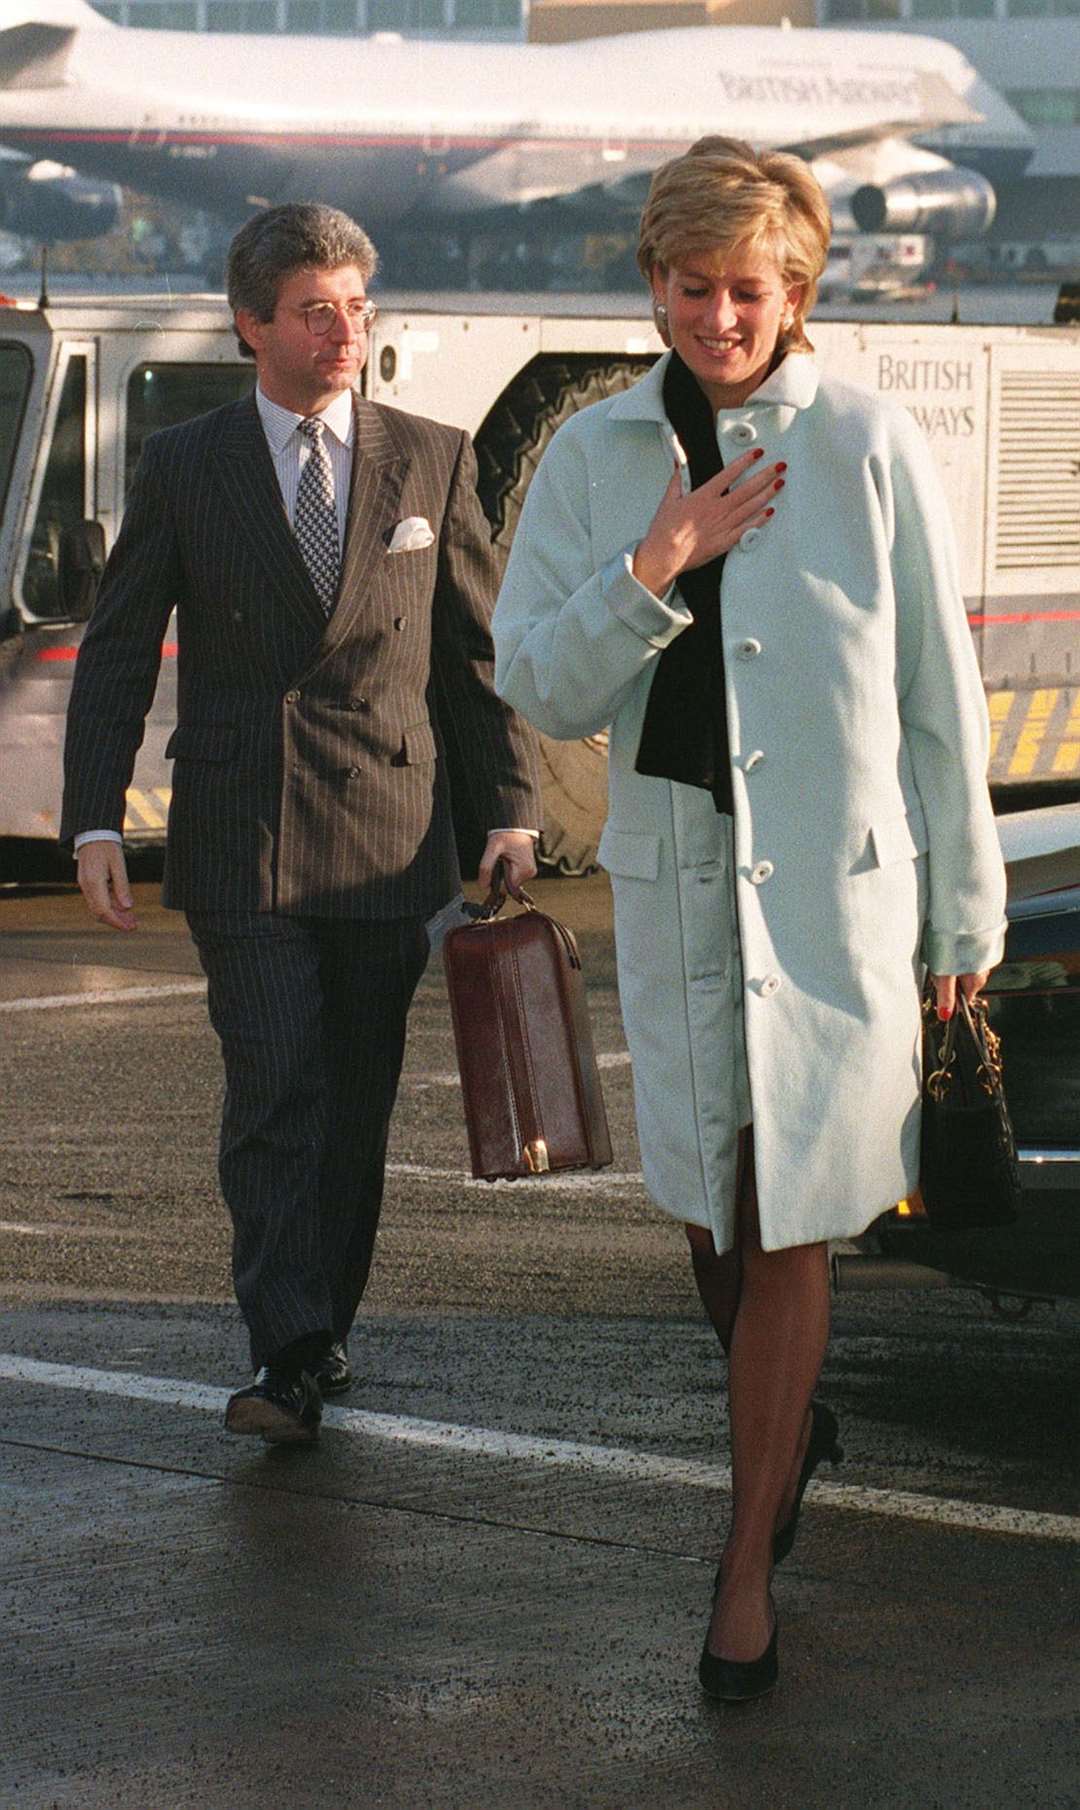 Diana with her then private secretary Patrick Jephson, at Heathrow Airport (Tim Ockenden/PA)